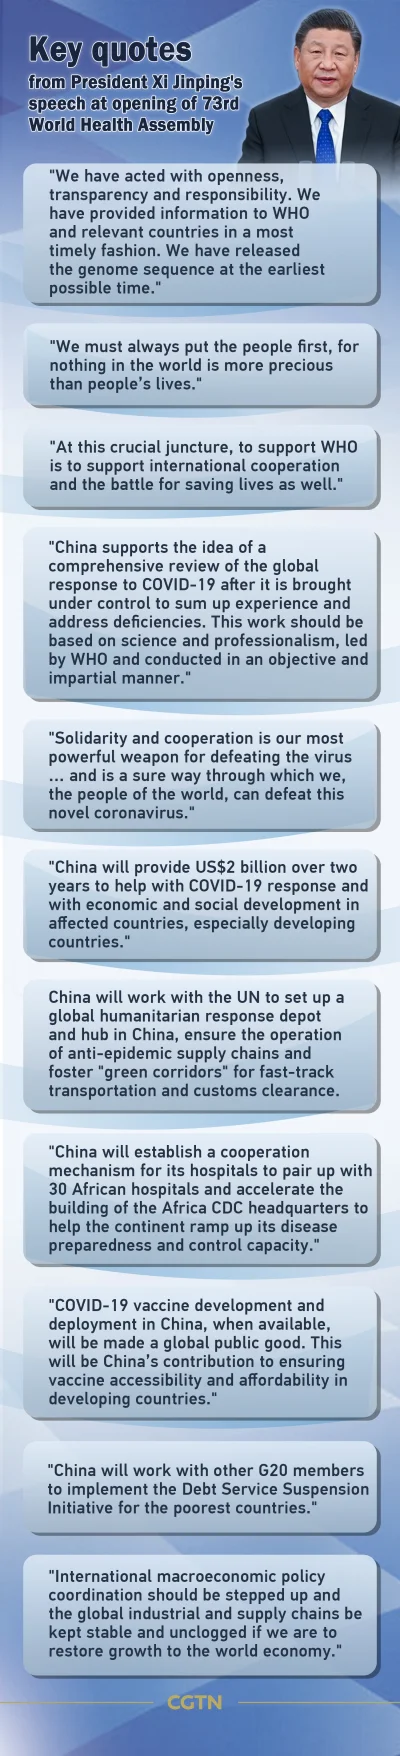 tr0llk0nt0 - Key quotes from President Xi Jinping's speech at opening of 73rd World H...